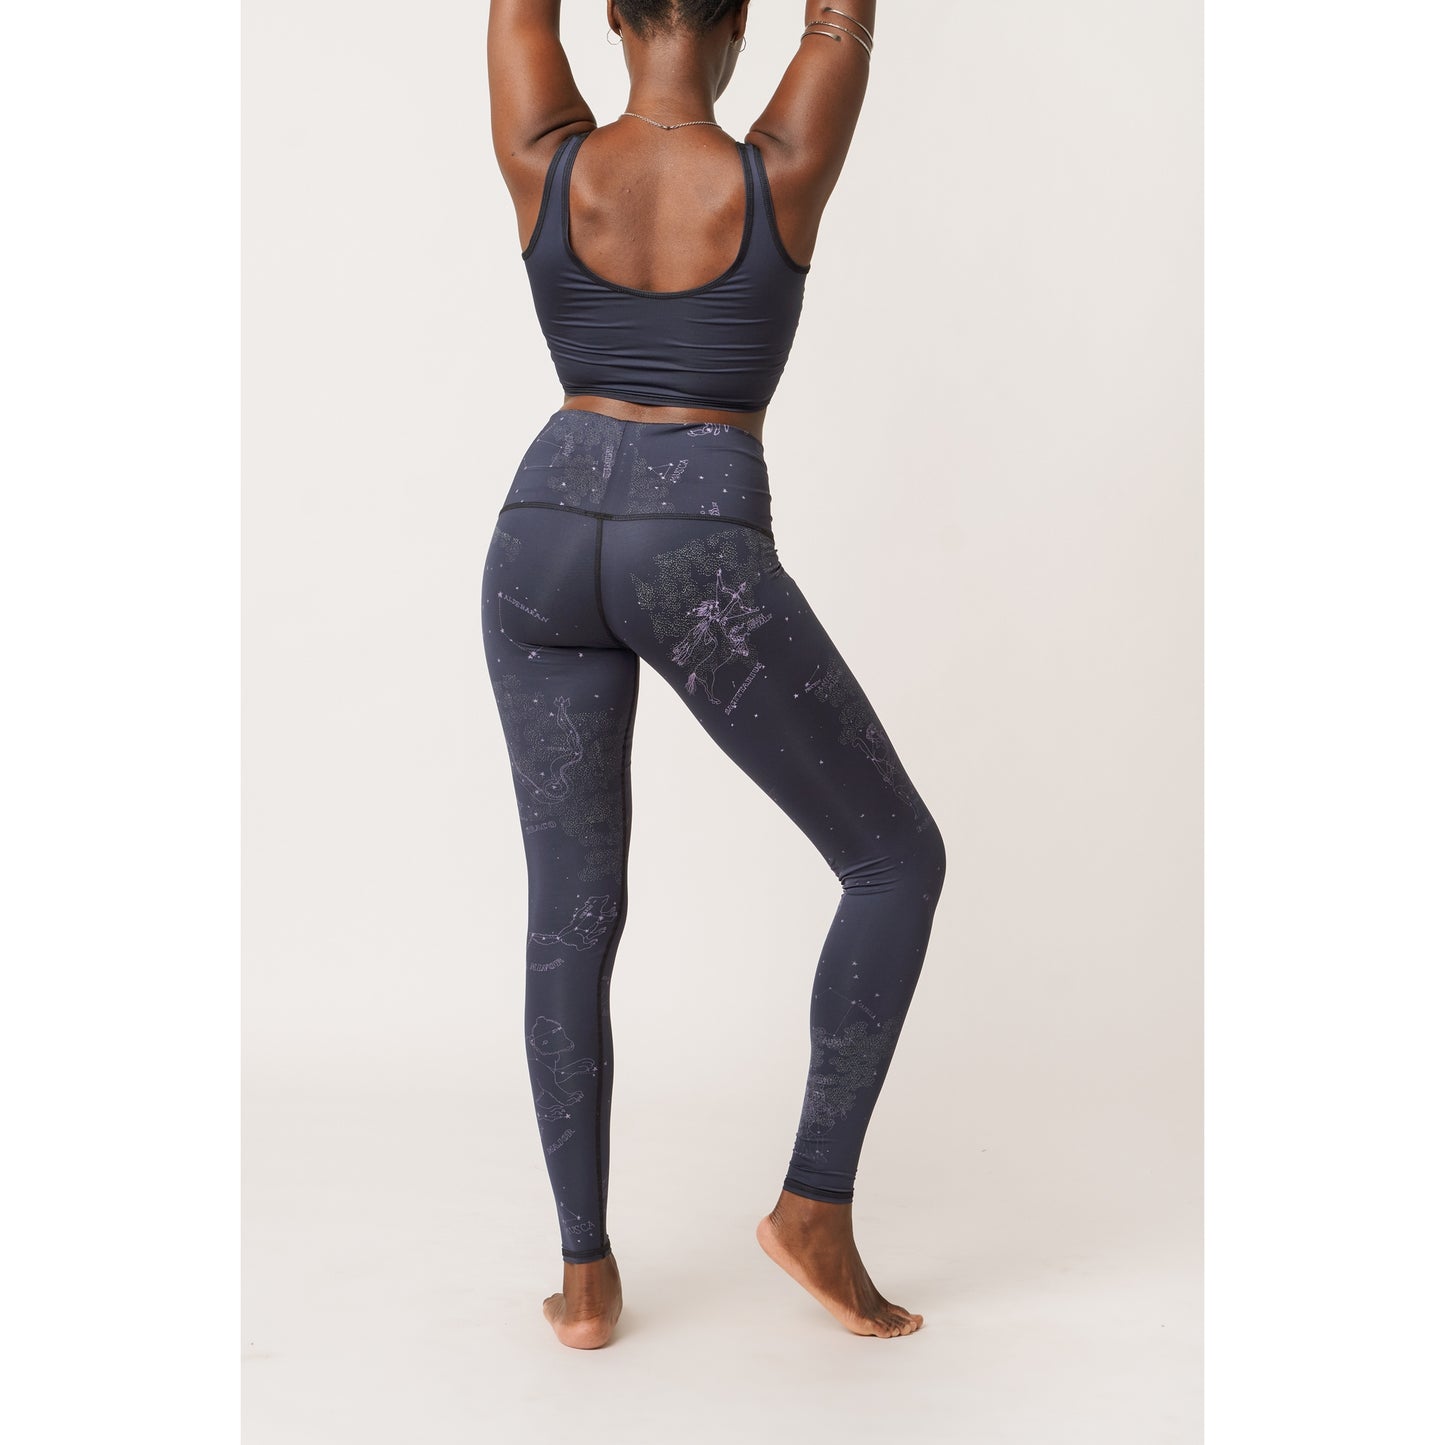 Teeki Yoga Pants Are Made Entirely From Recycled Water Bottles